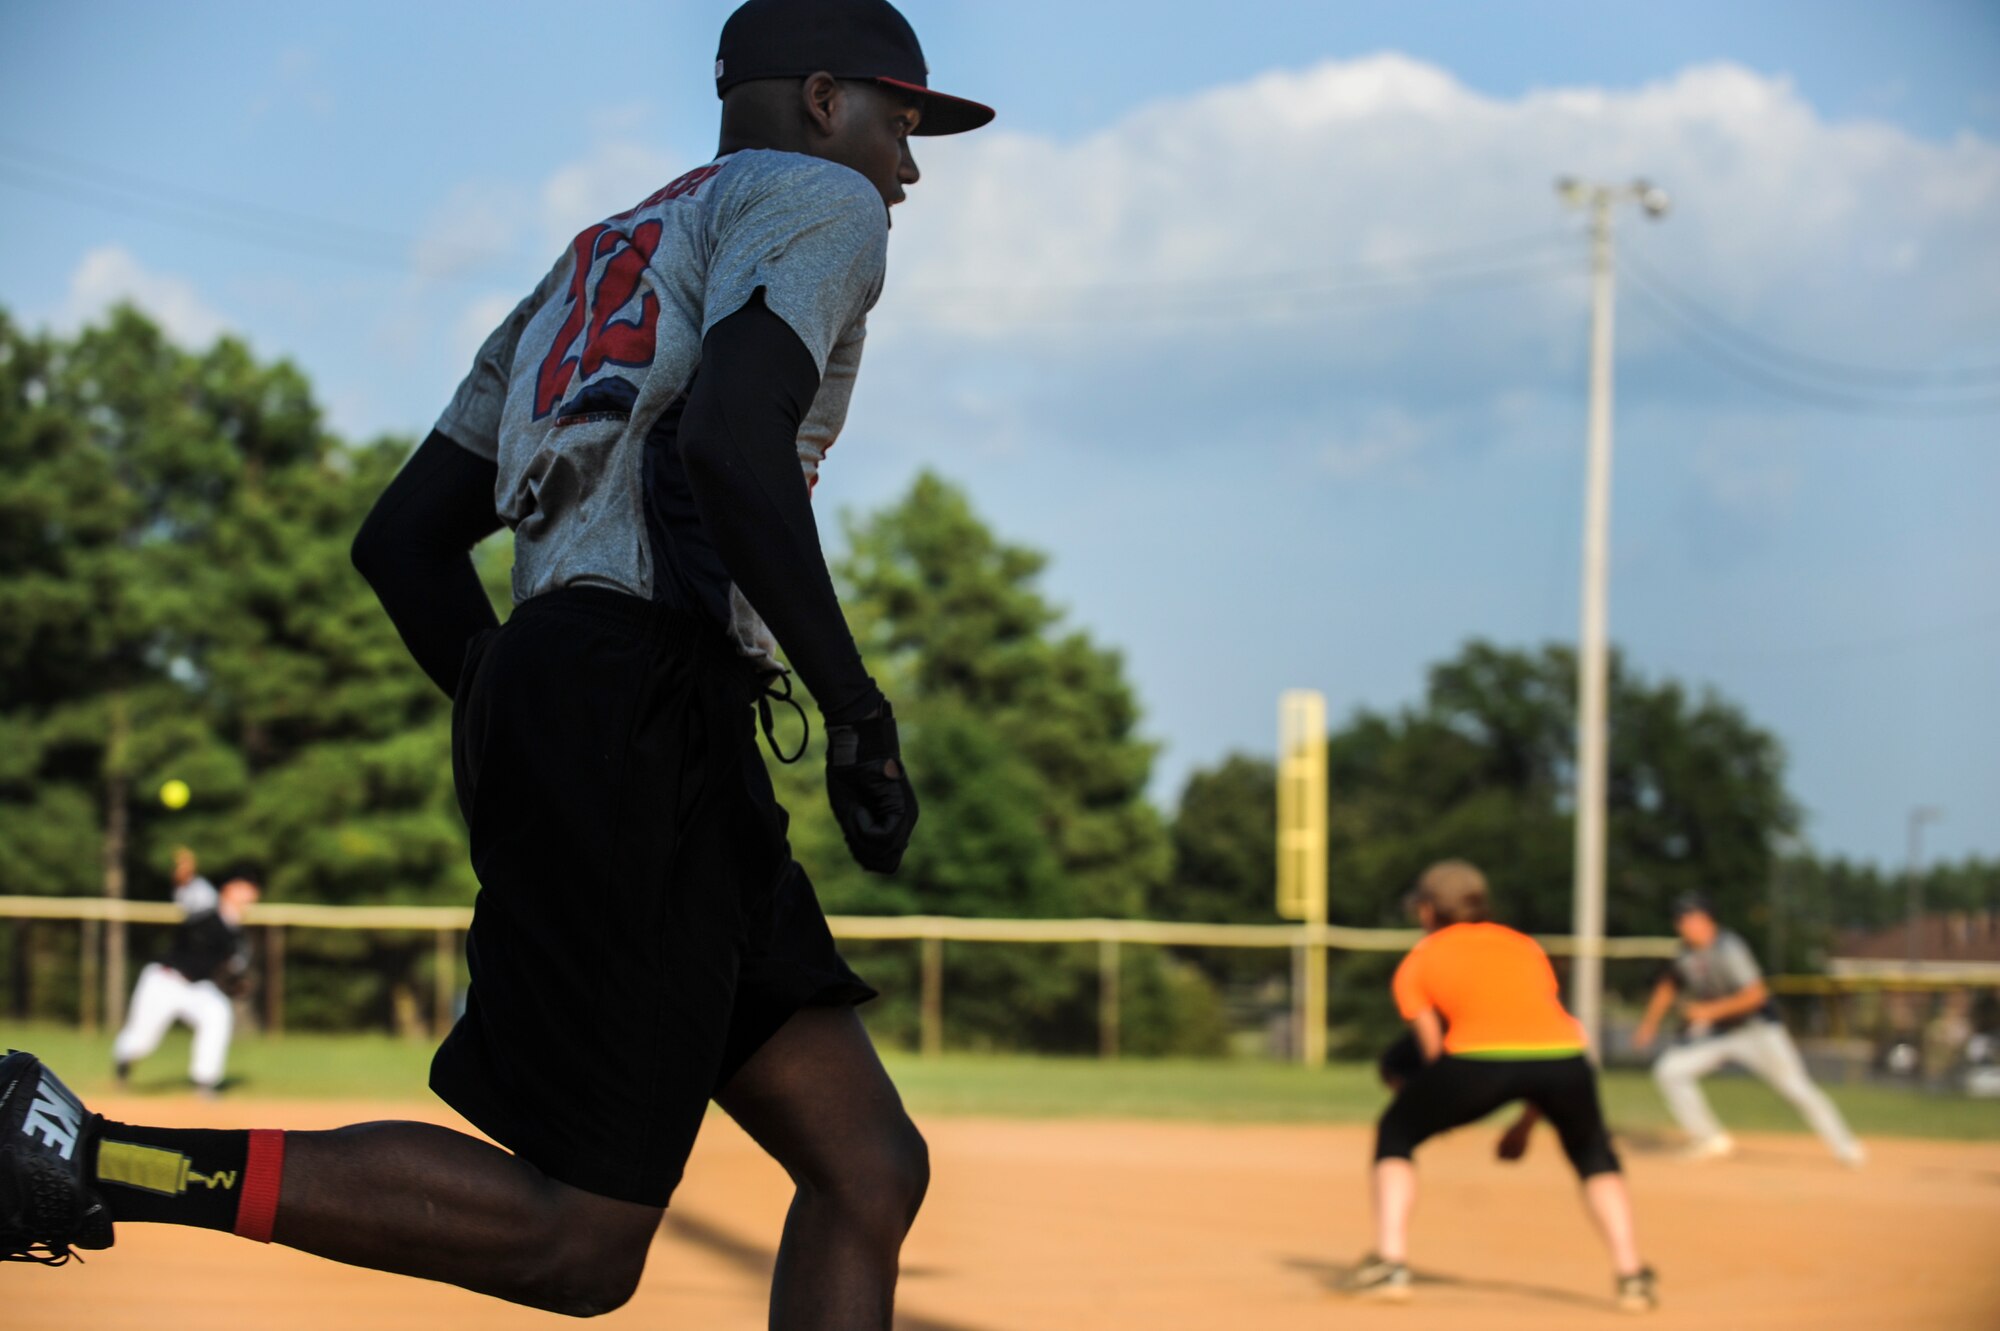 Senior Airman Darrius Northern, the 19th Logistics Readiness Squadron center fielder, rounds third base and heads to home plate during the intramural softball championship game Aug. 27, 2014 at Little Rock Air Force Base, Ark. The 19th LRS finished their season with a record of 9-2 and capped off their season with an 18-5 victory over the 19th Aircraft Maintenance Squadron to win the championship. (U.S. Air Force photo by Airman 1st Class Cliffton Dolezal)